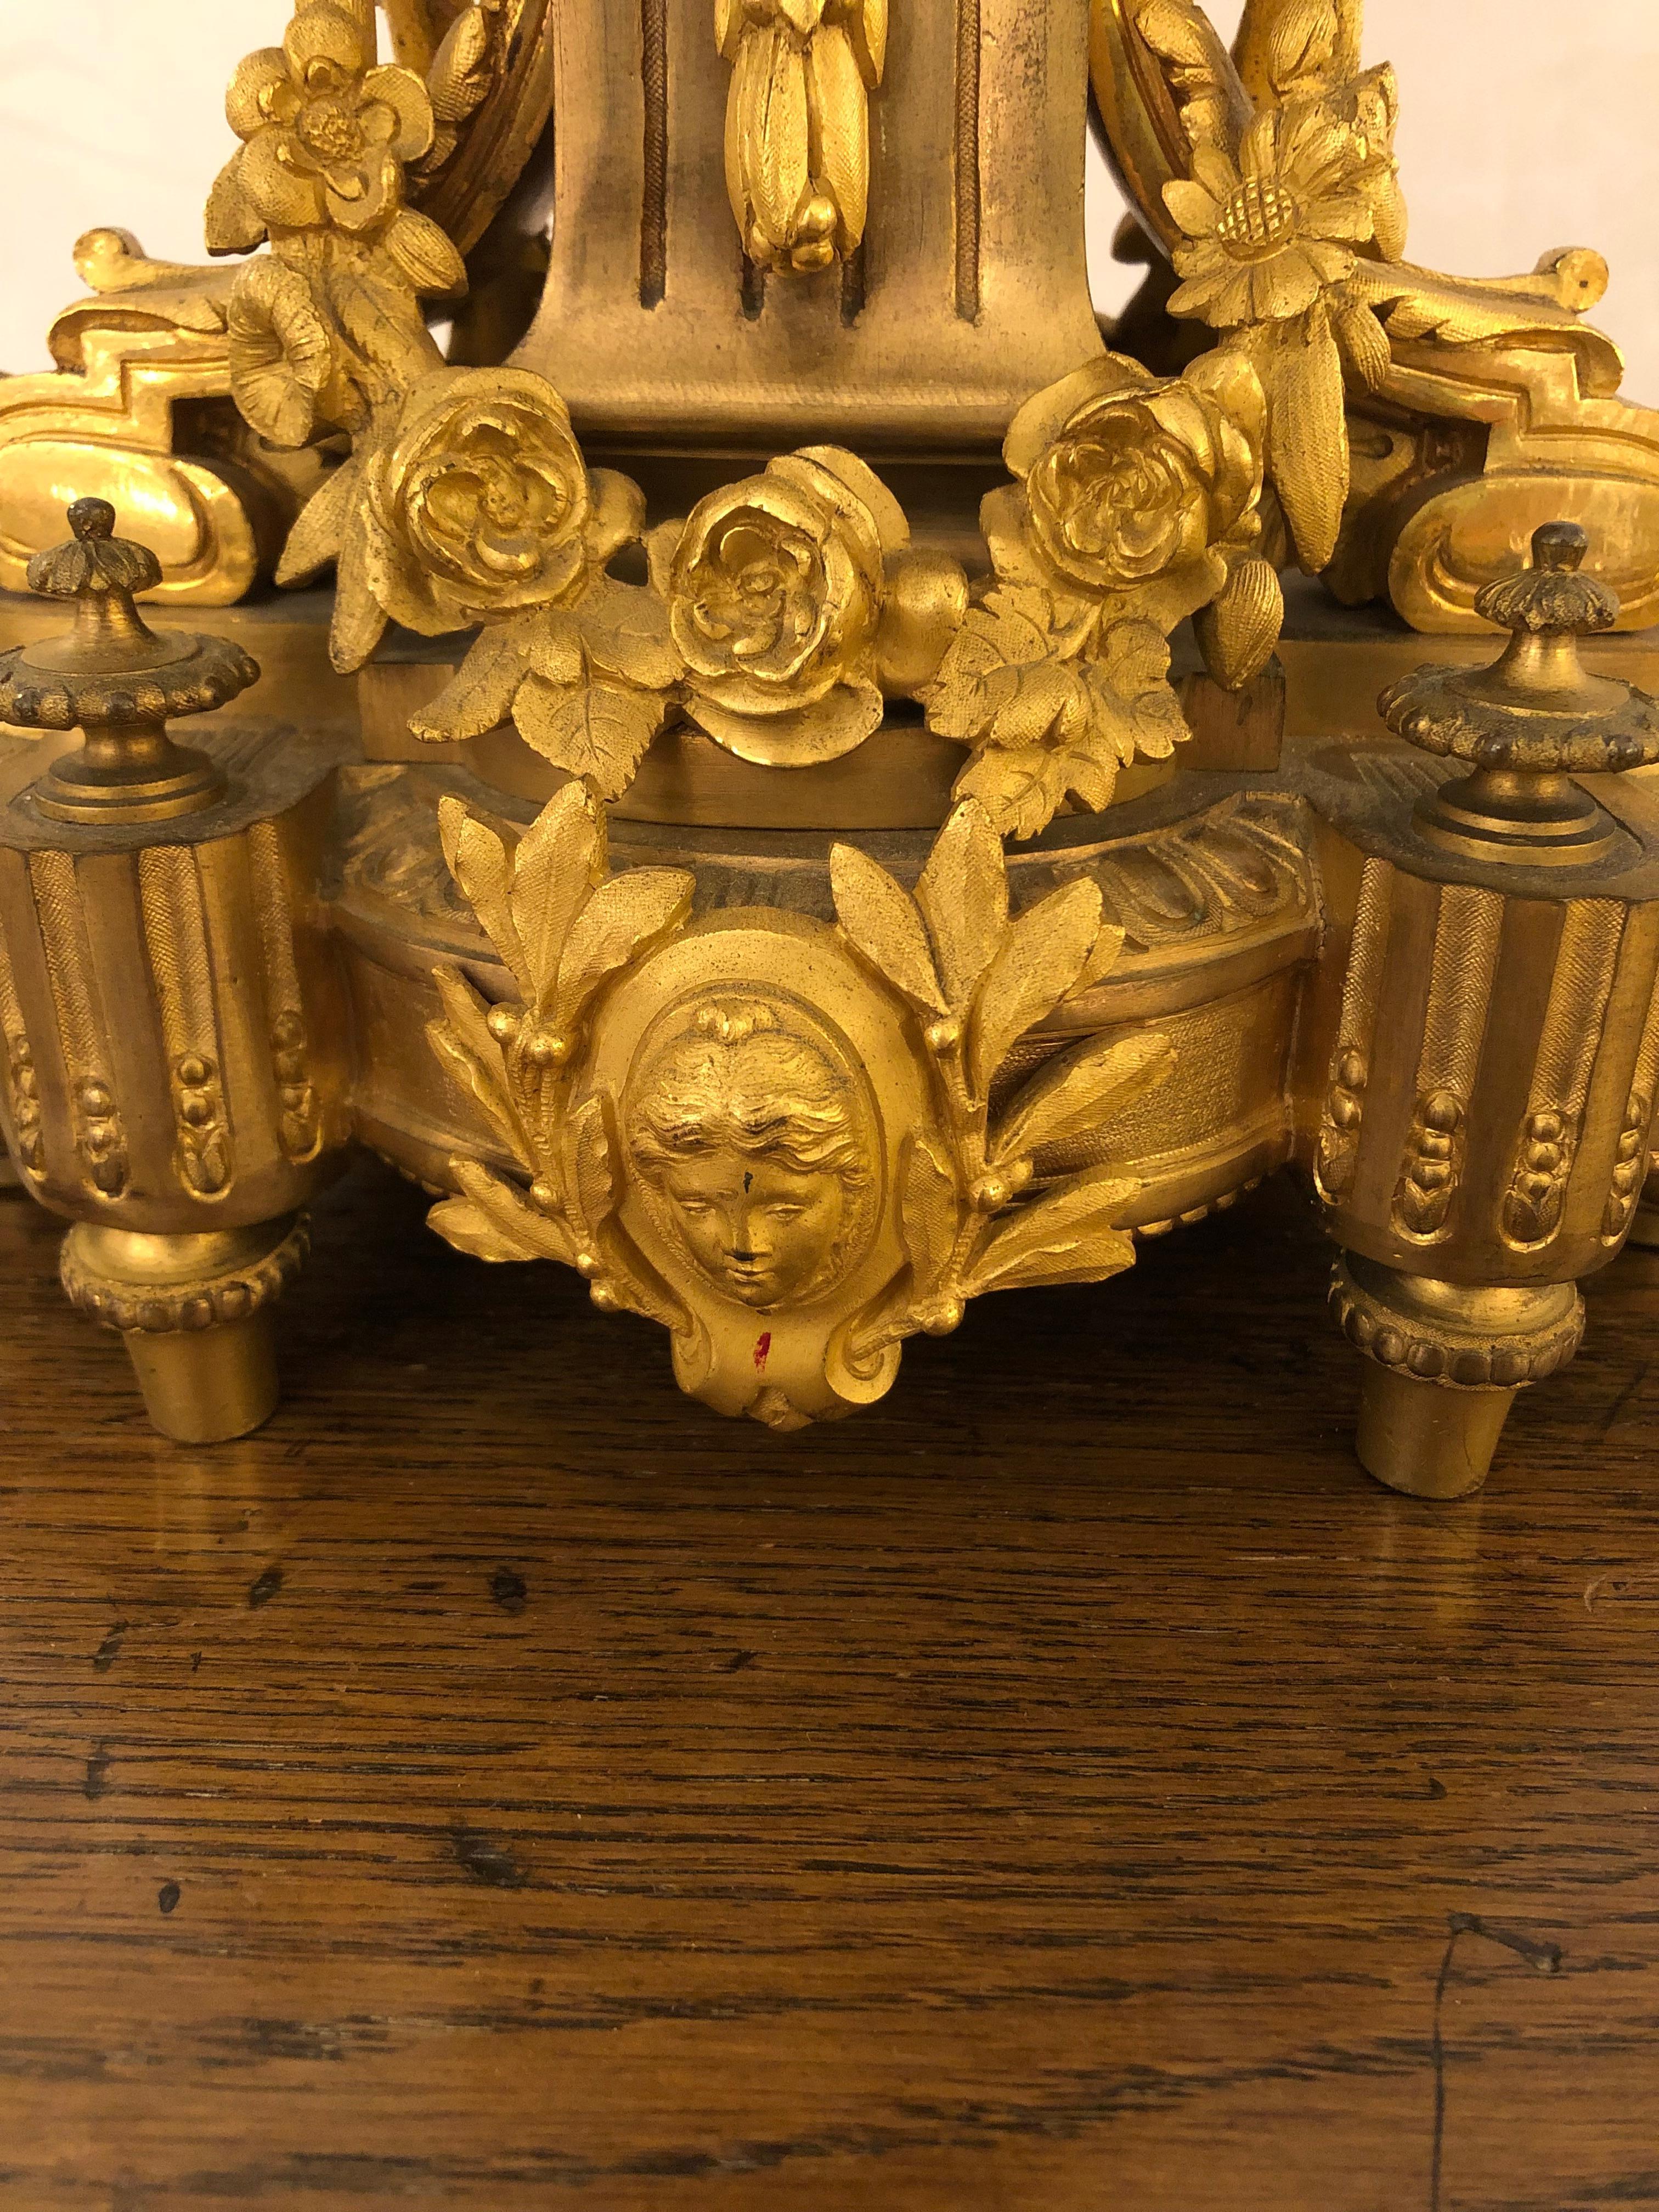 Palatial pair of Neoclassical style relief cast bronze and gilt bronze mounted 7 light candelabras having scrolled arms over a gilt floral wreathed fluted base, above an elaborate second base with garlands and floral bocage. Coin like medallions